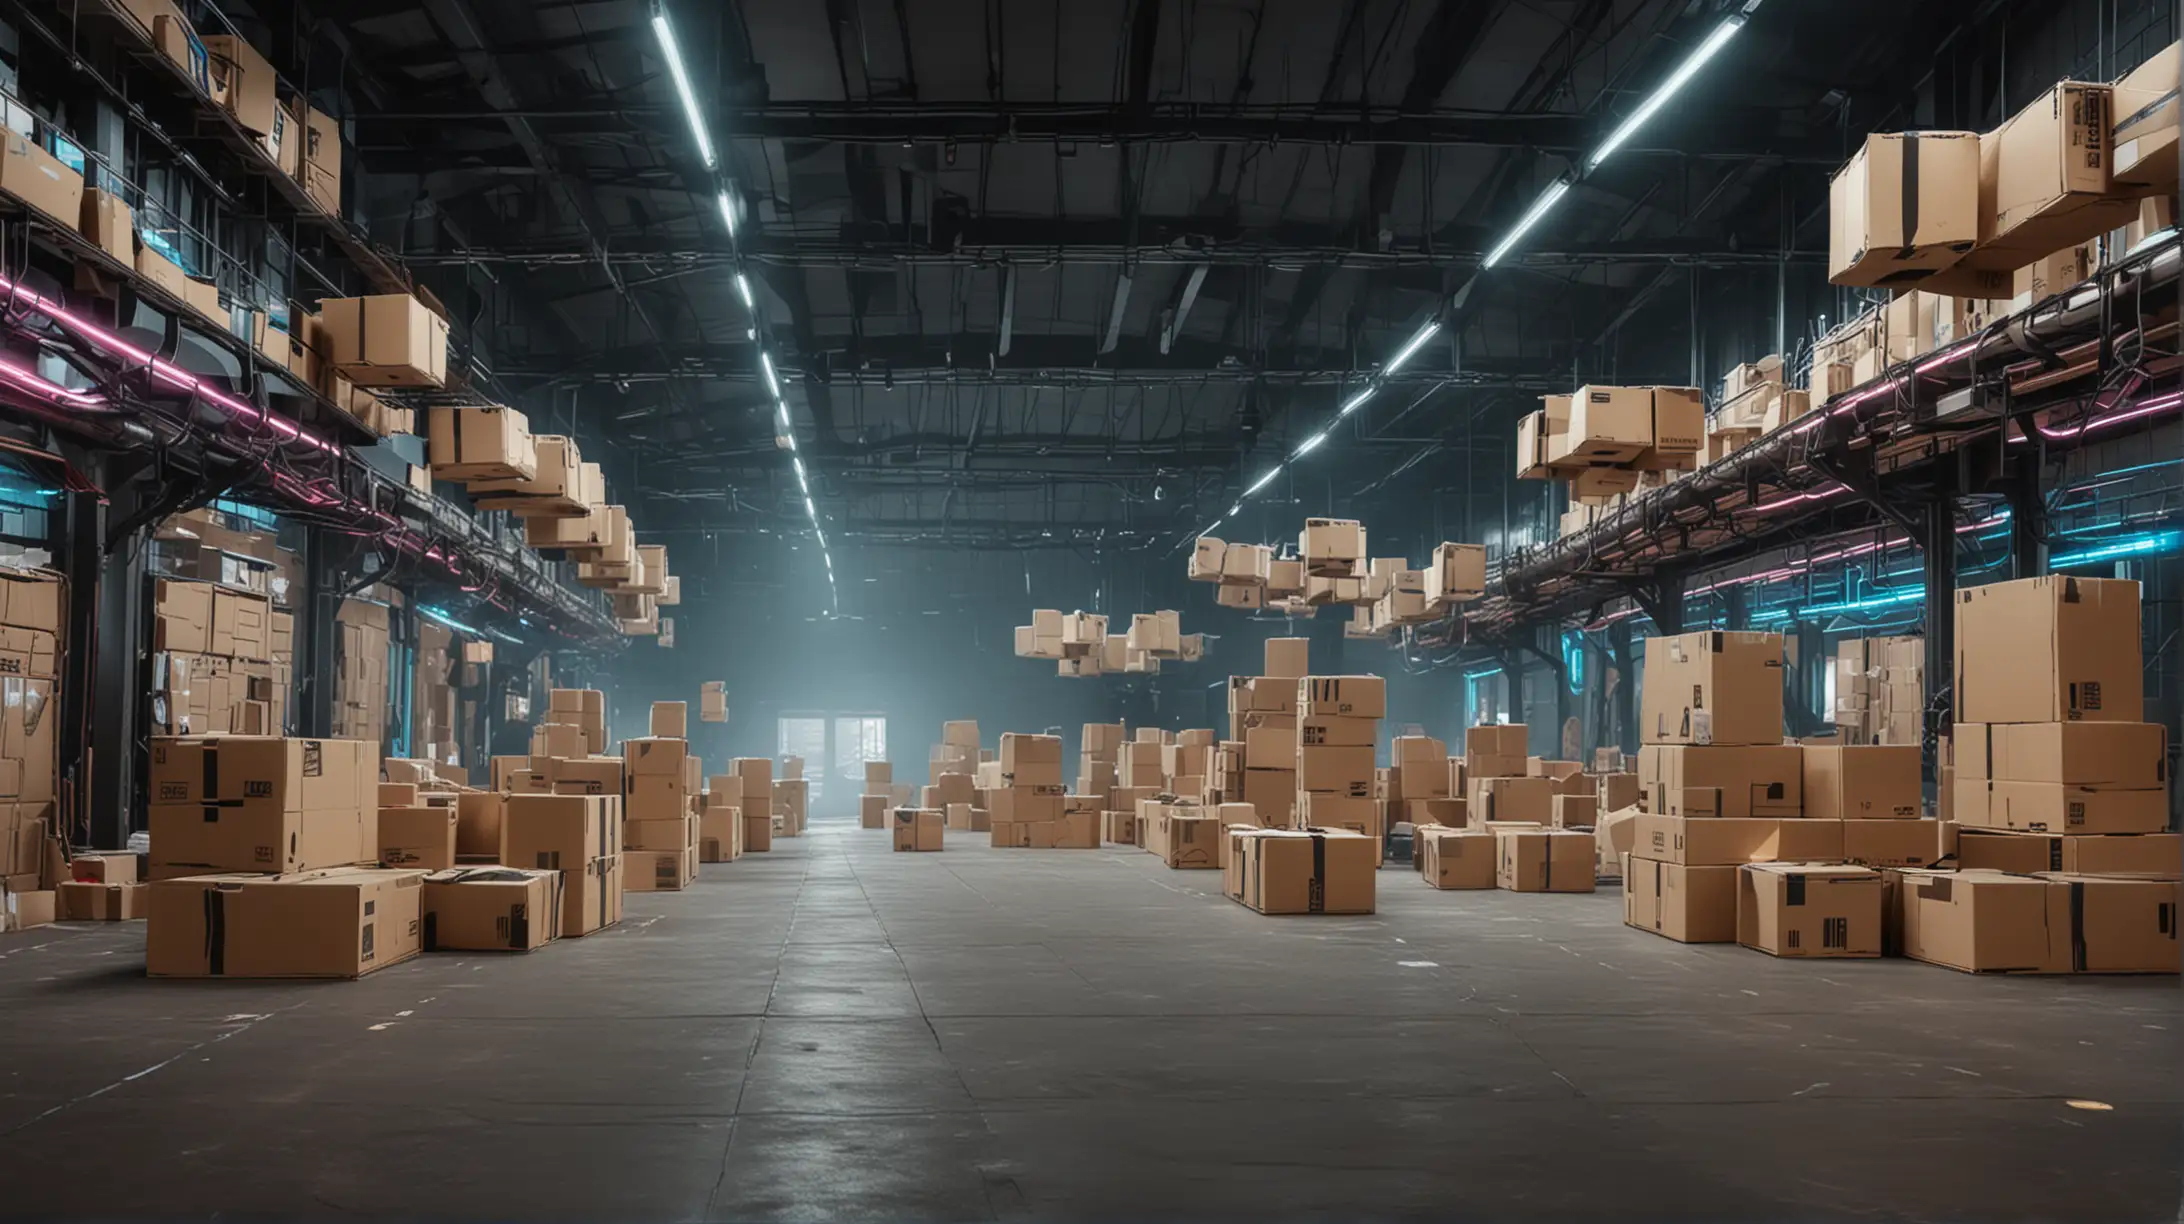 Futuristic Factory Interior with Floating Cardboard Boxes and Neon Lighting